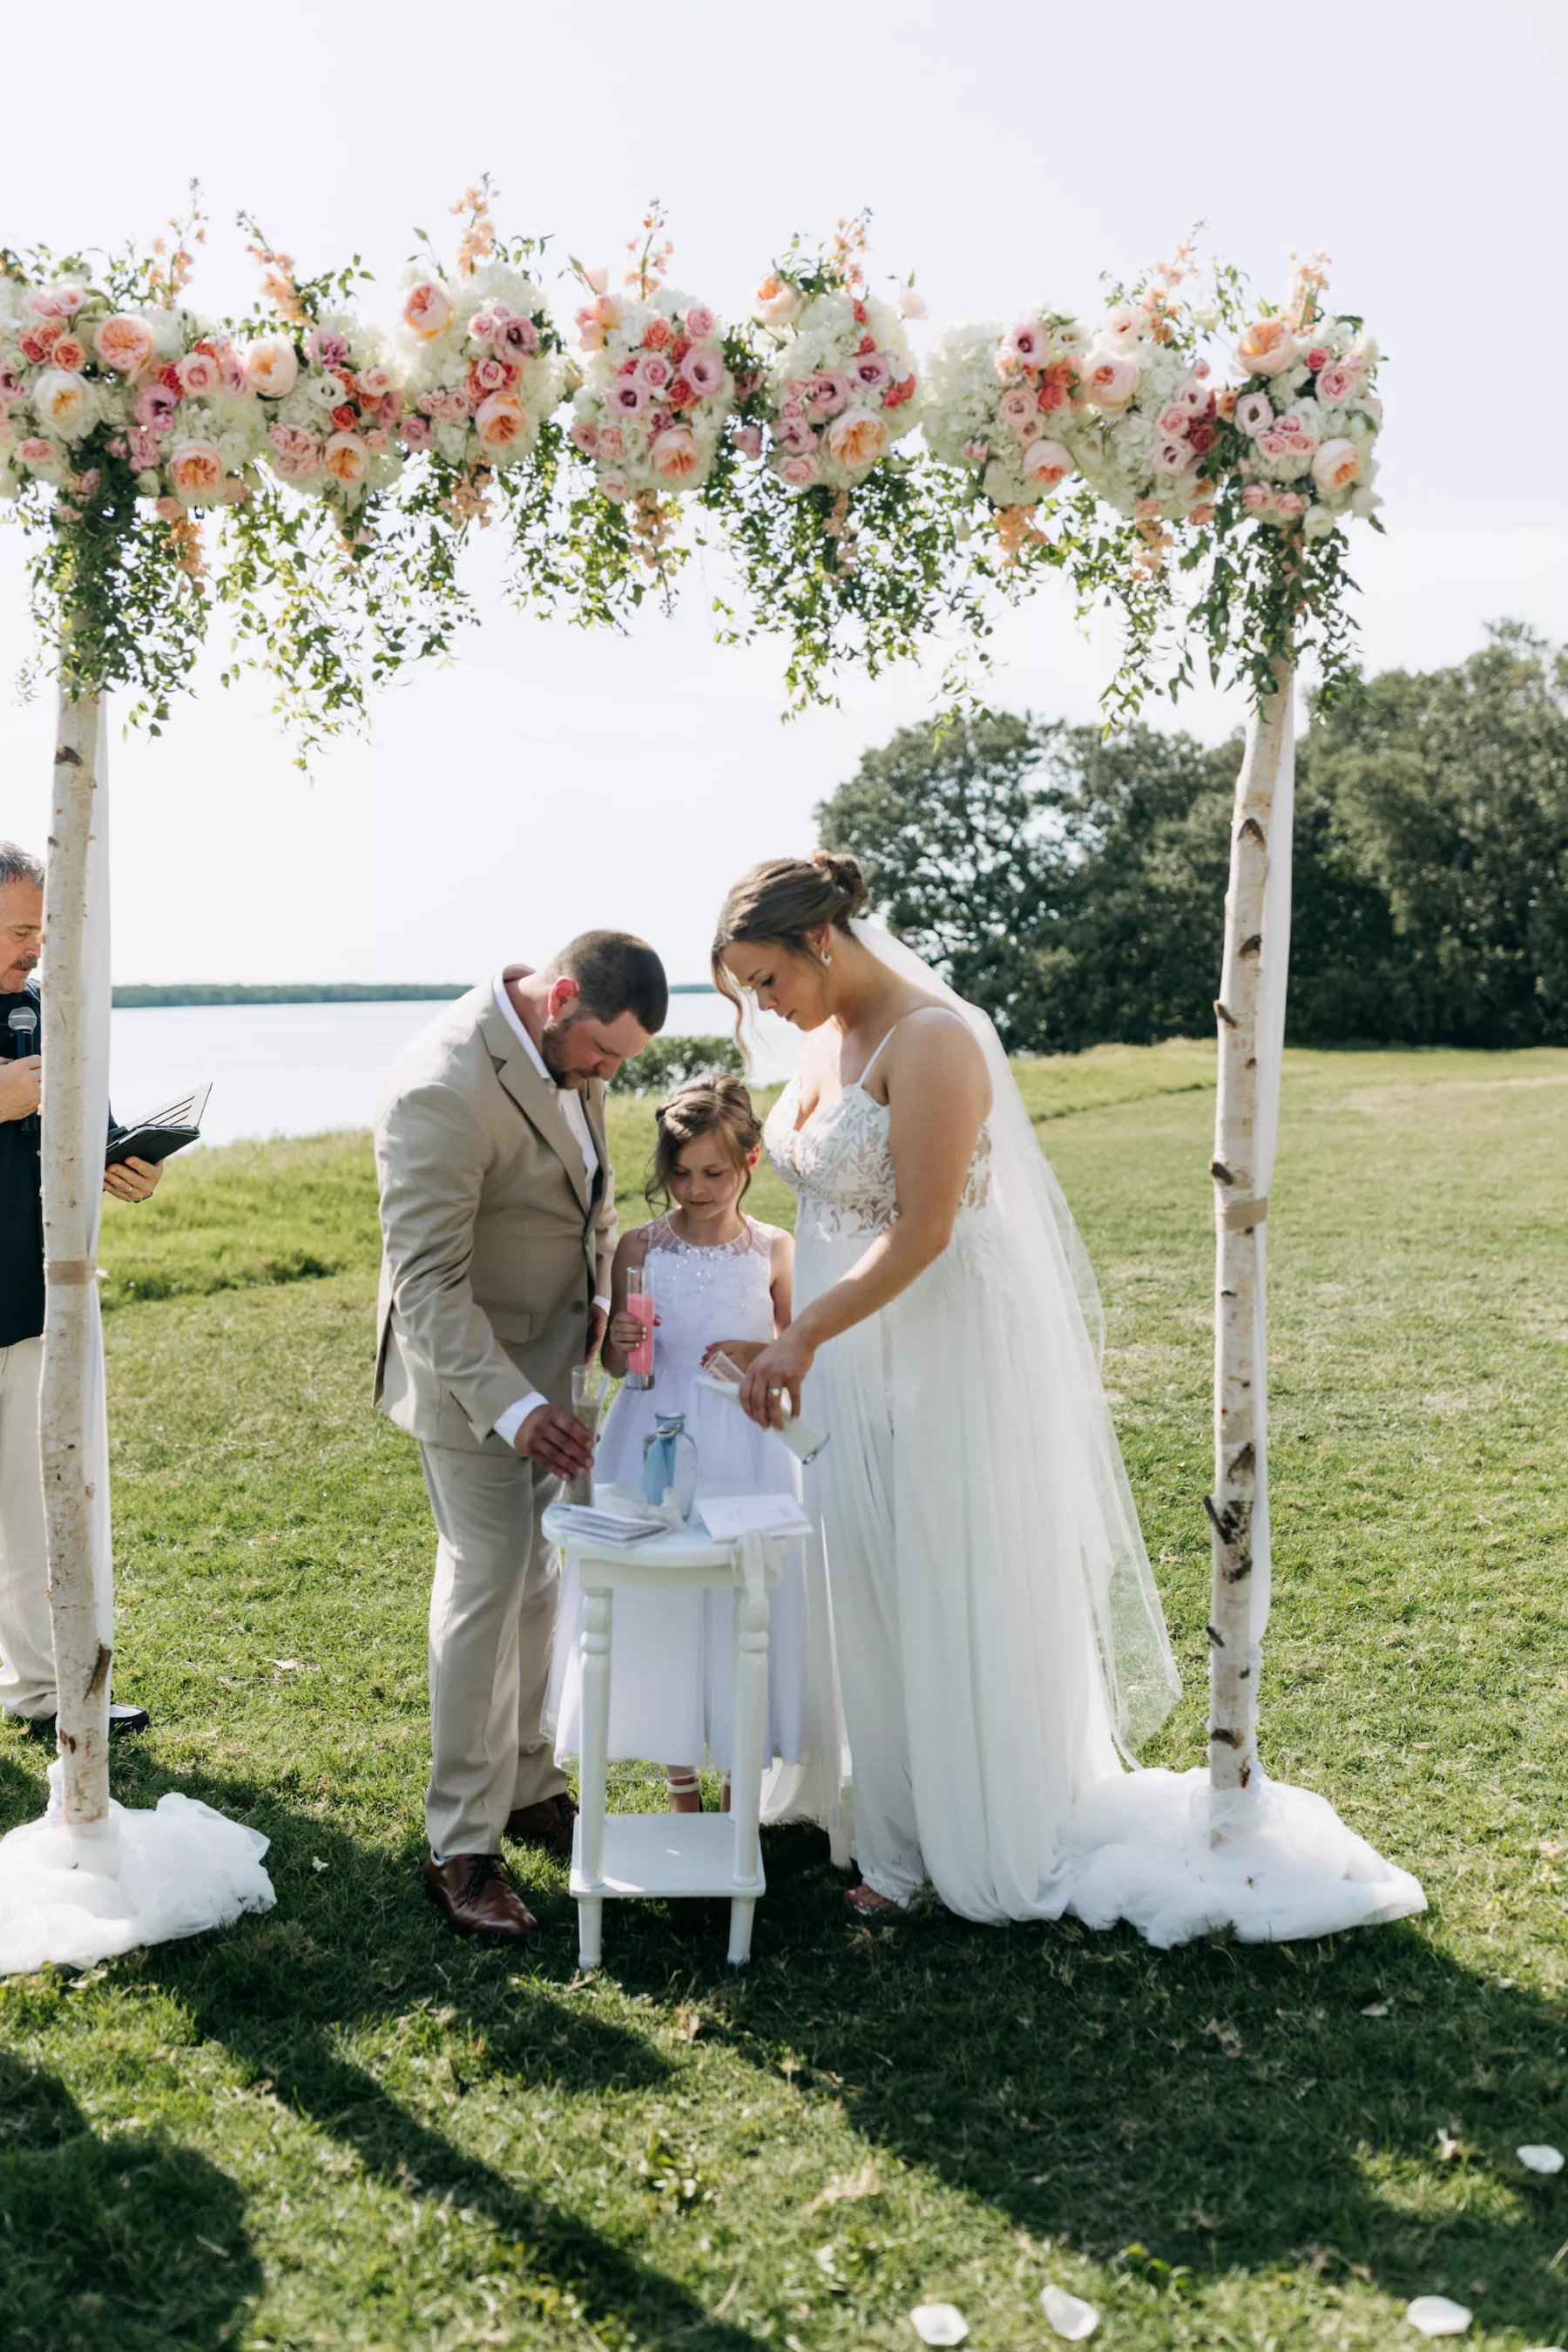 Bride and Groom with Daughter | Wedding Sand Ceremony Ideas